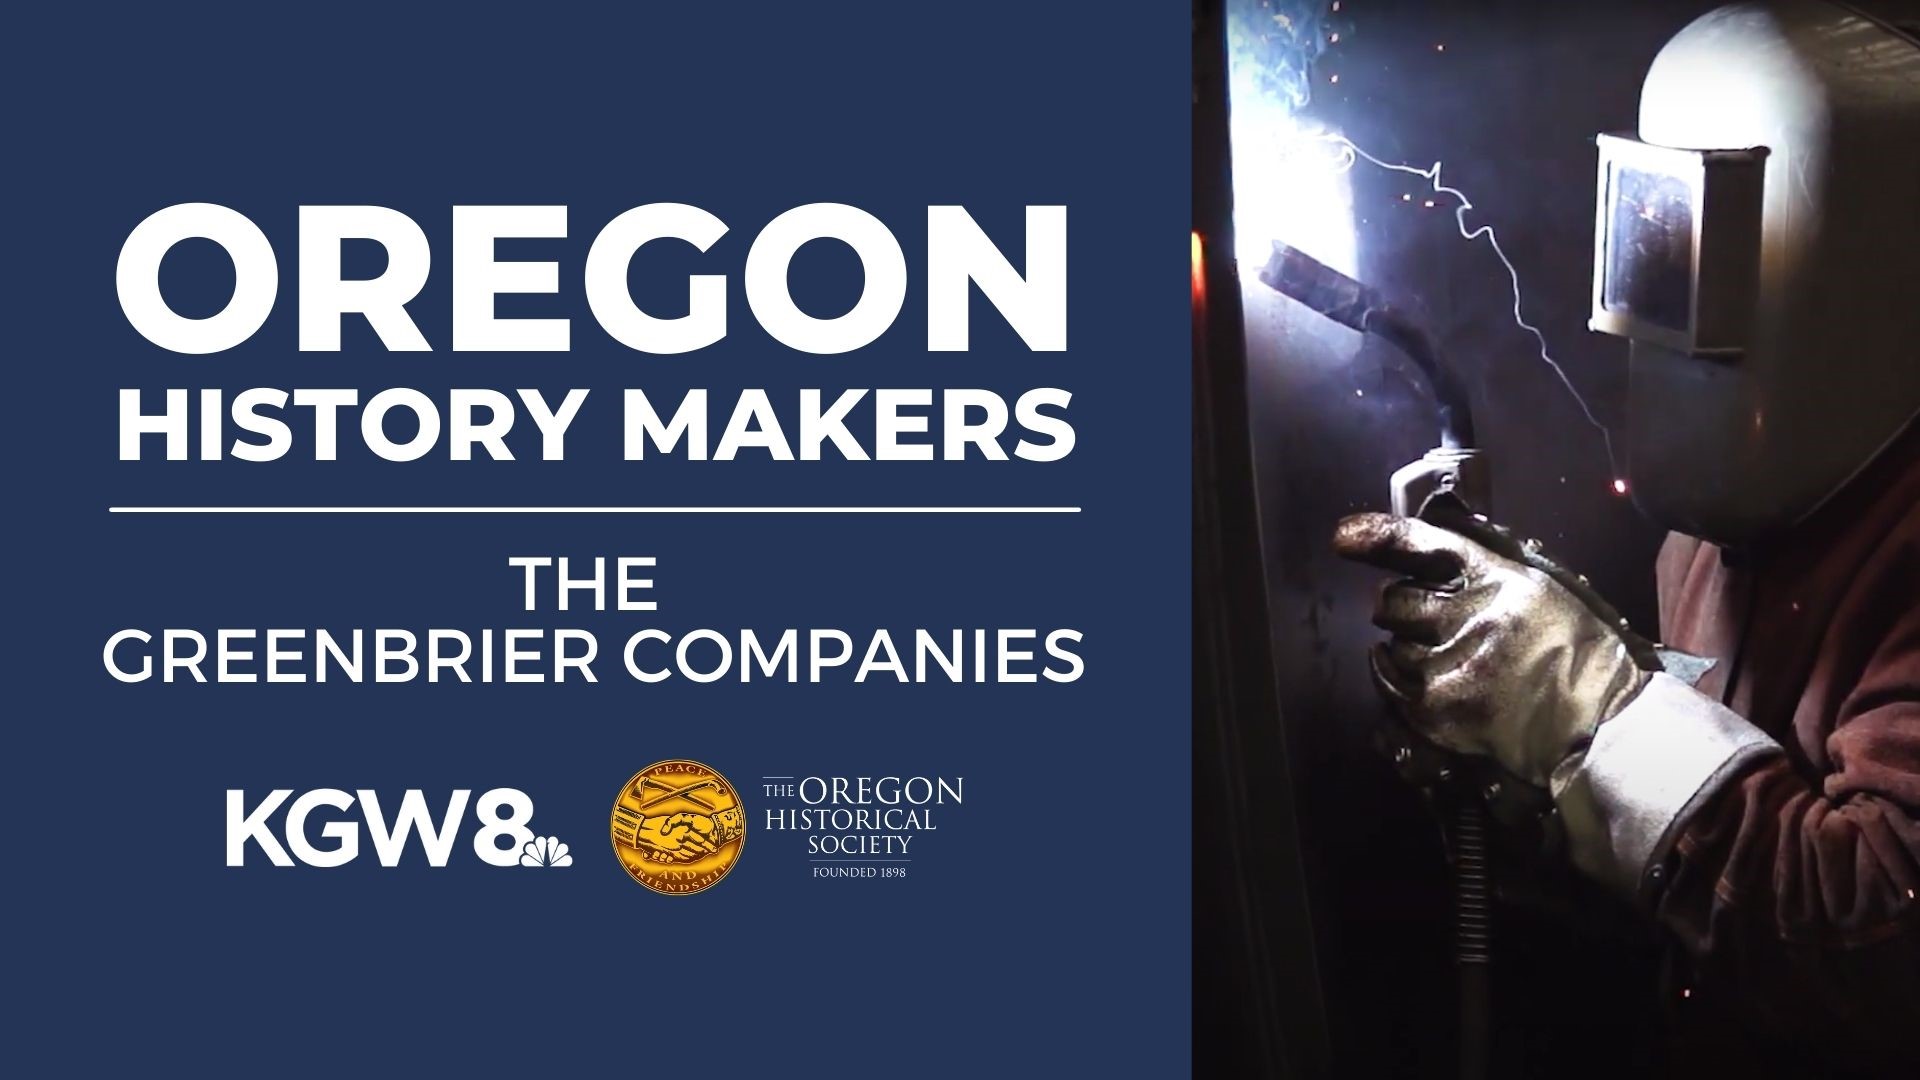 What began in 1919 in Portland has grown to become a leading supplier of equipment and services to global freight transportation markets.